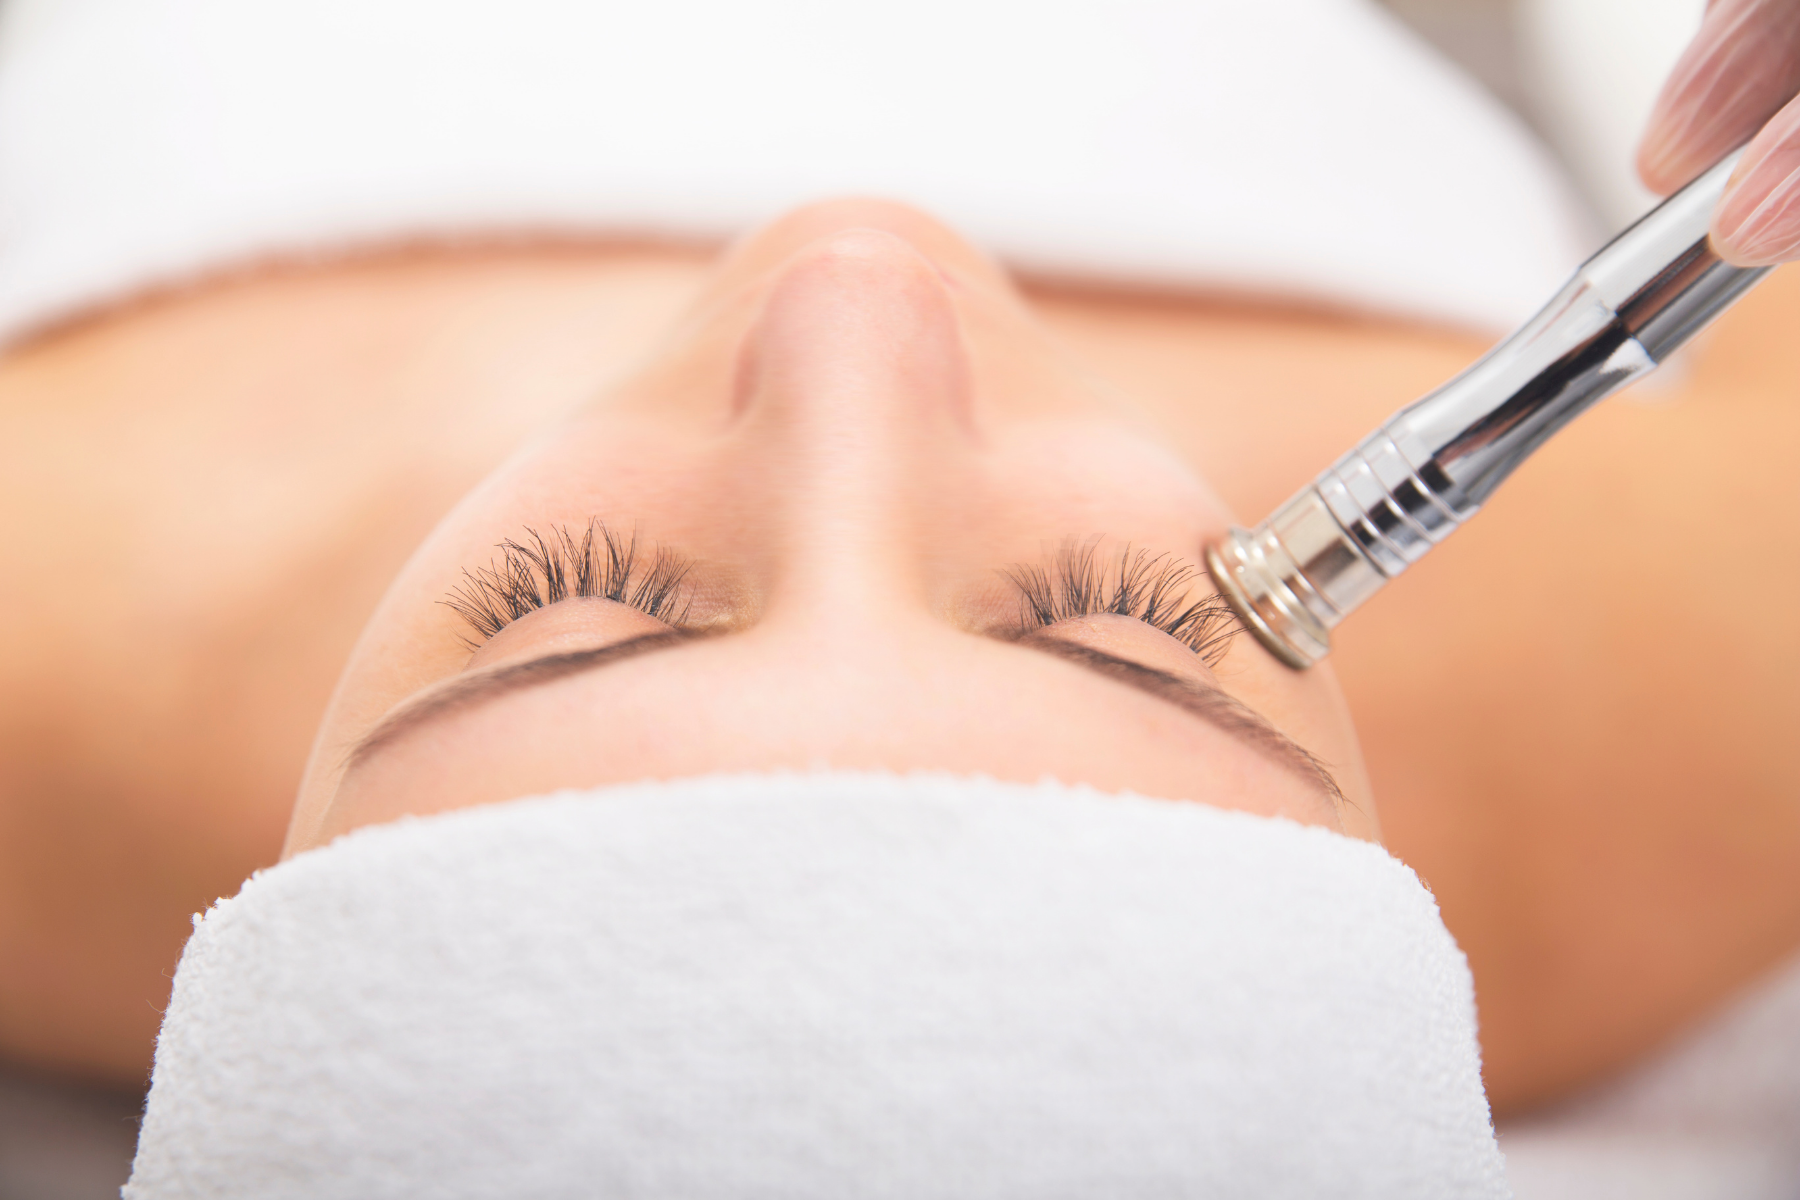 HydraFacial vs Microdermabrasion: What is the Difference?